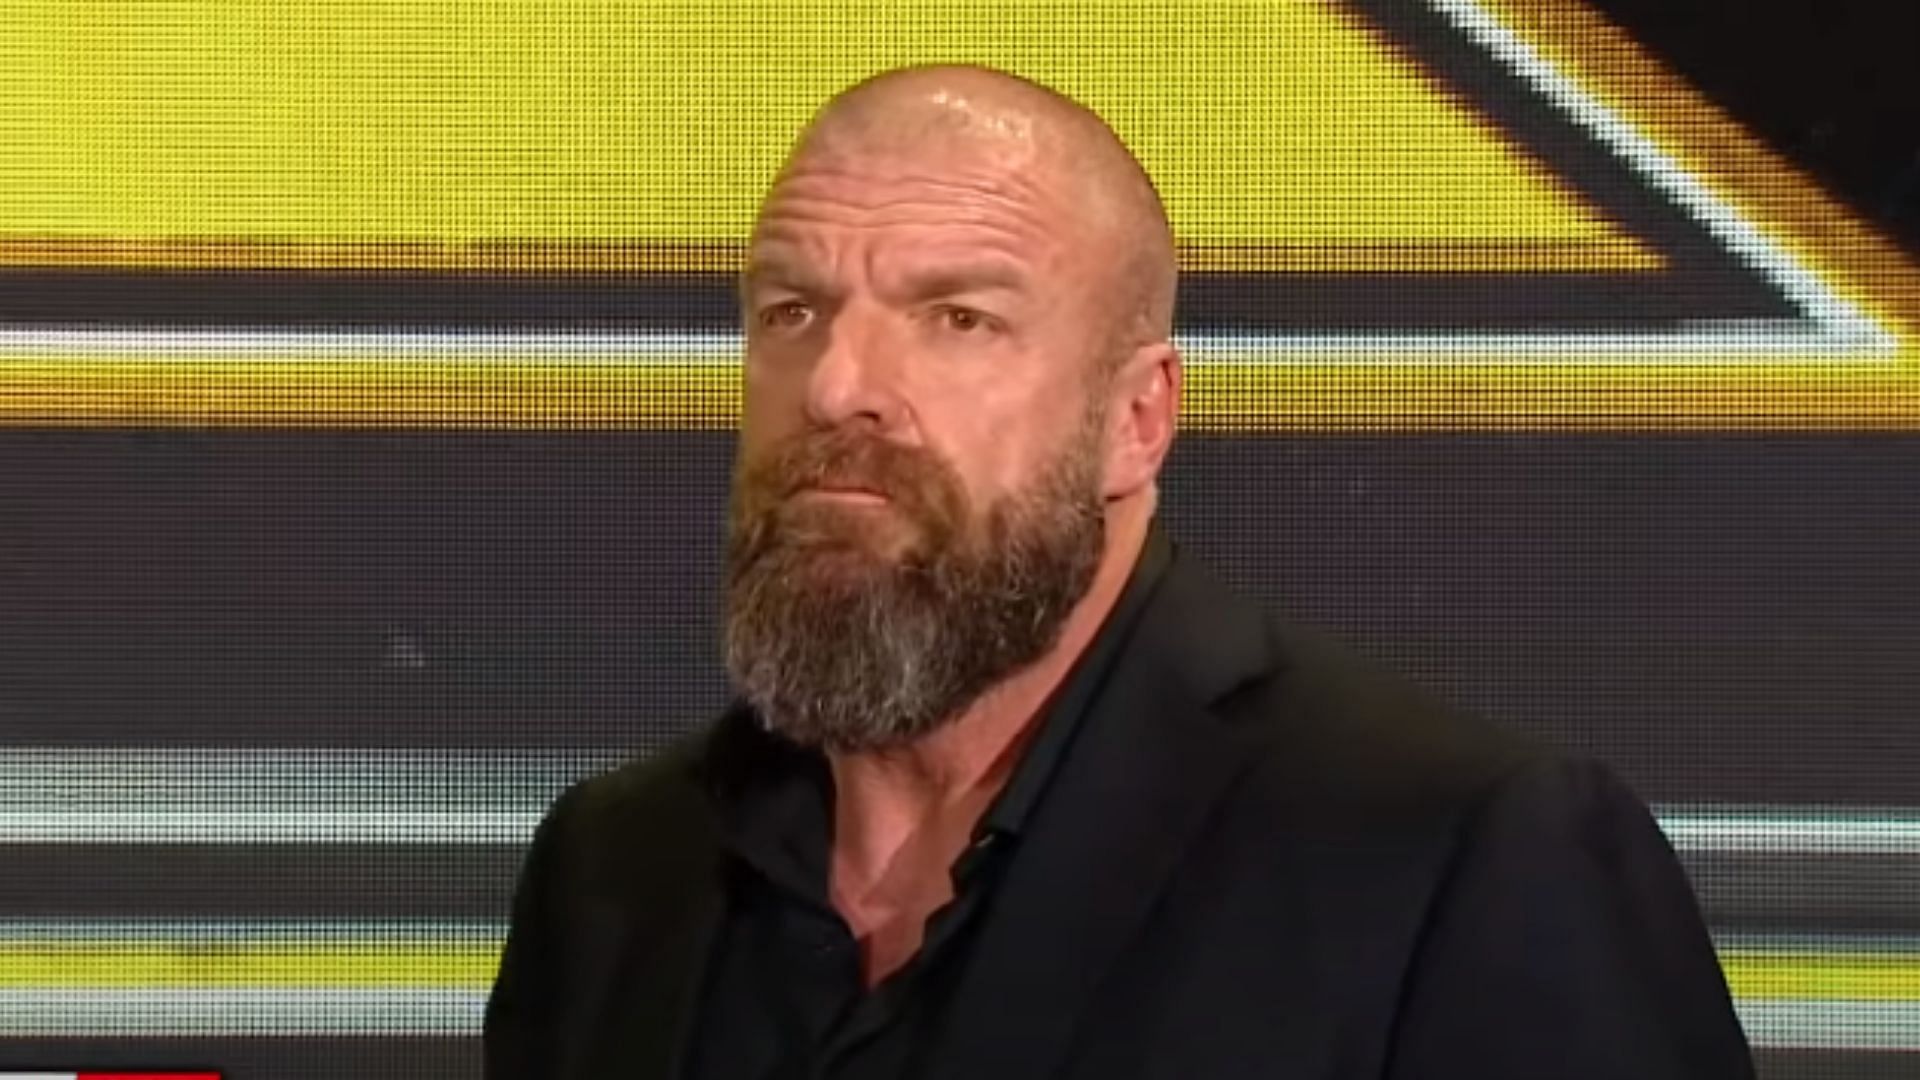 Triple H founded the NXT brand in 2010